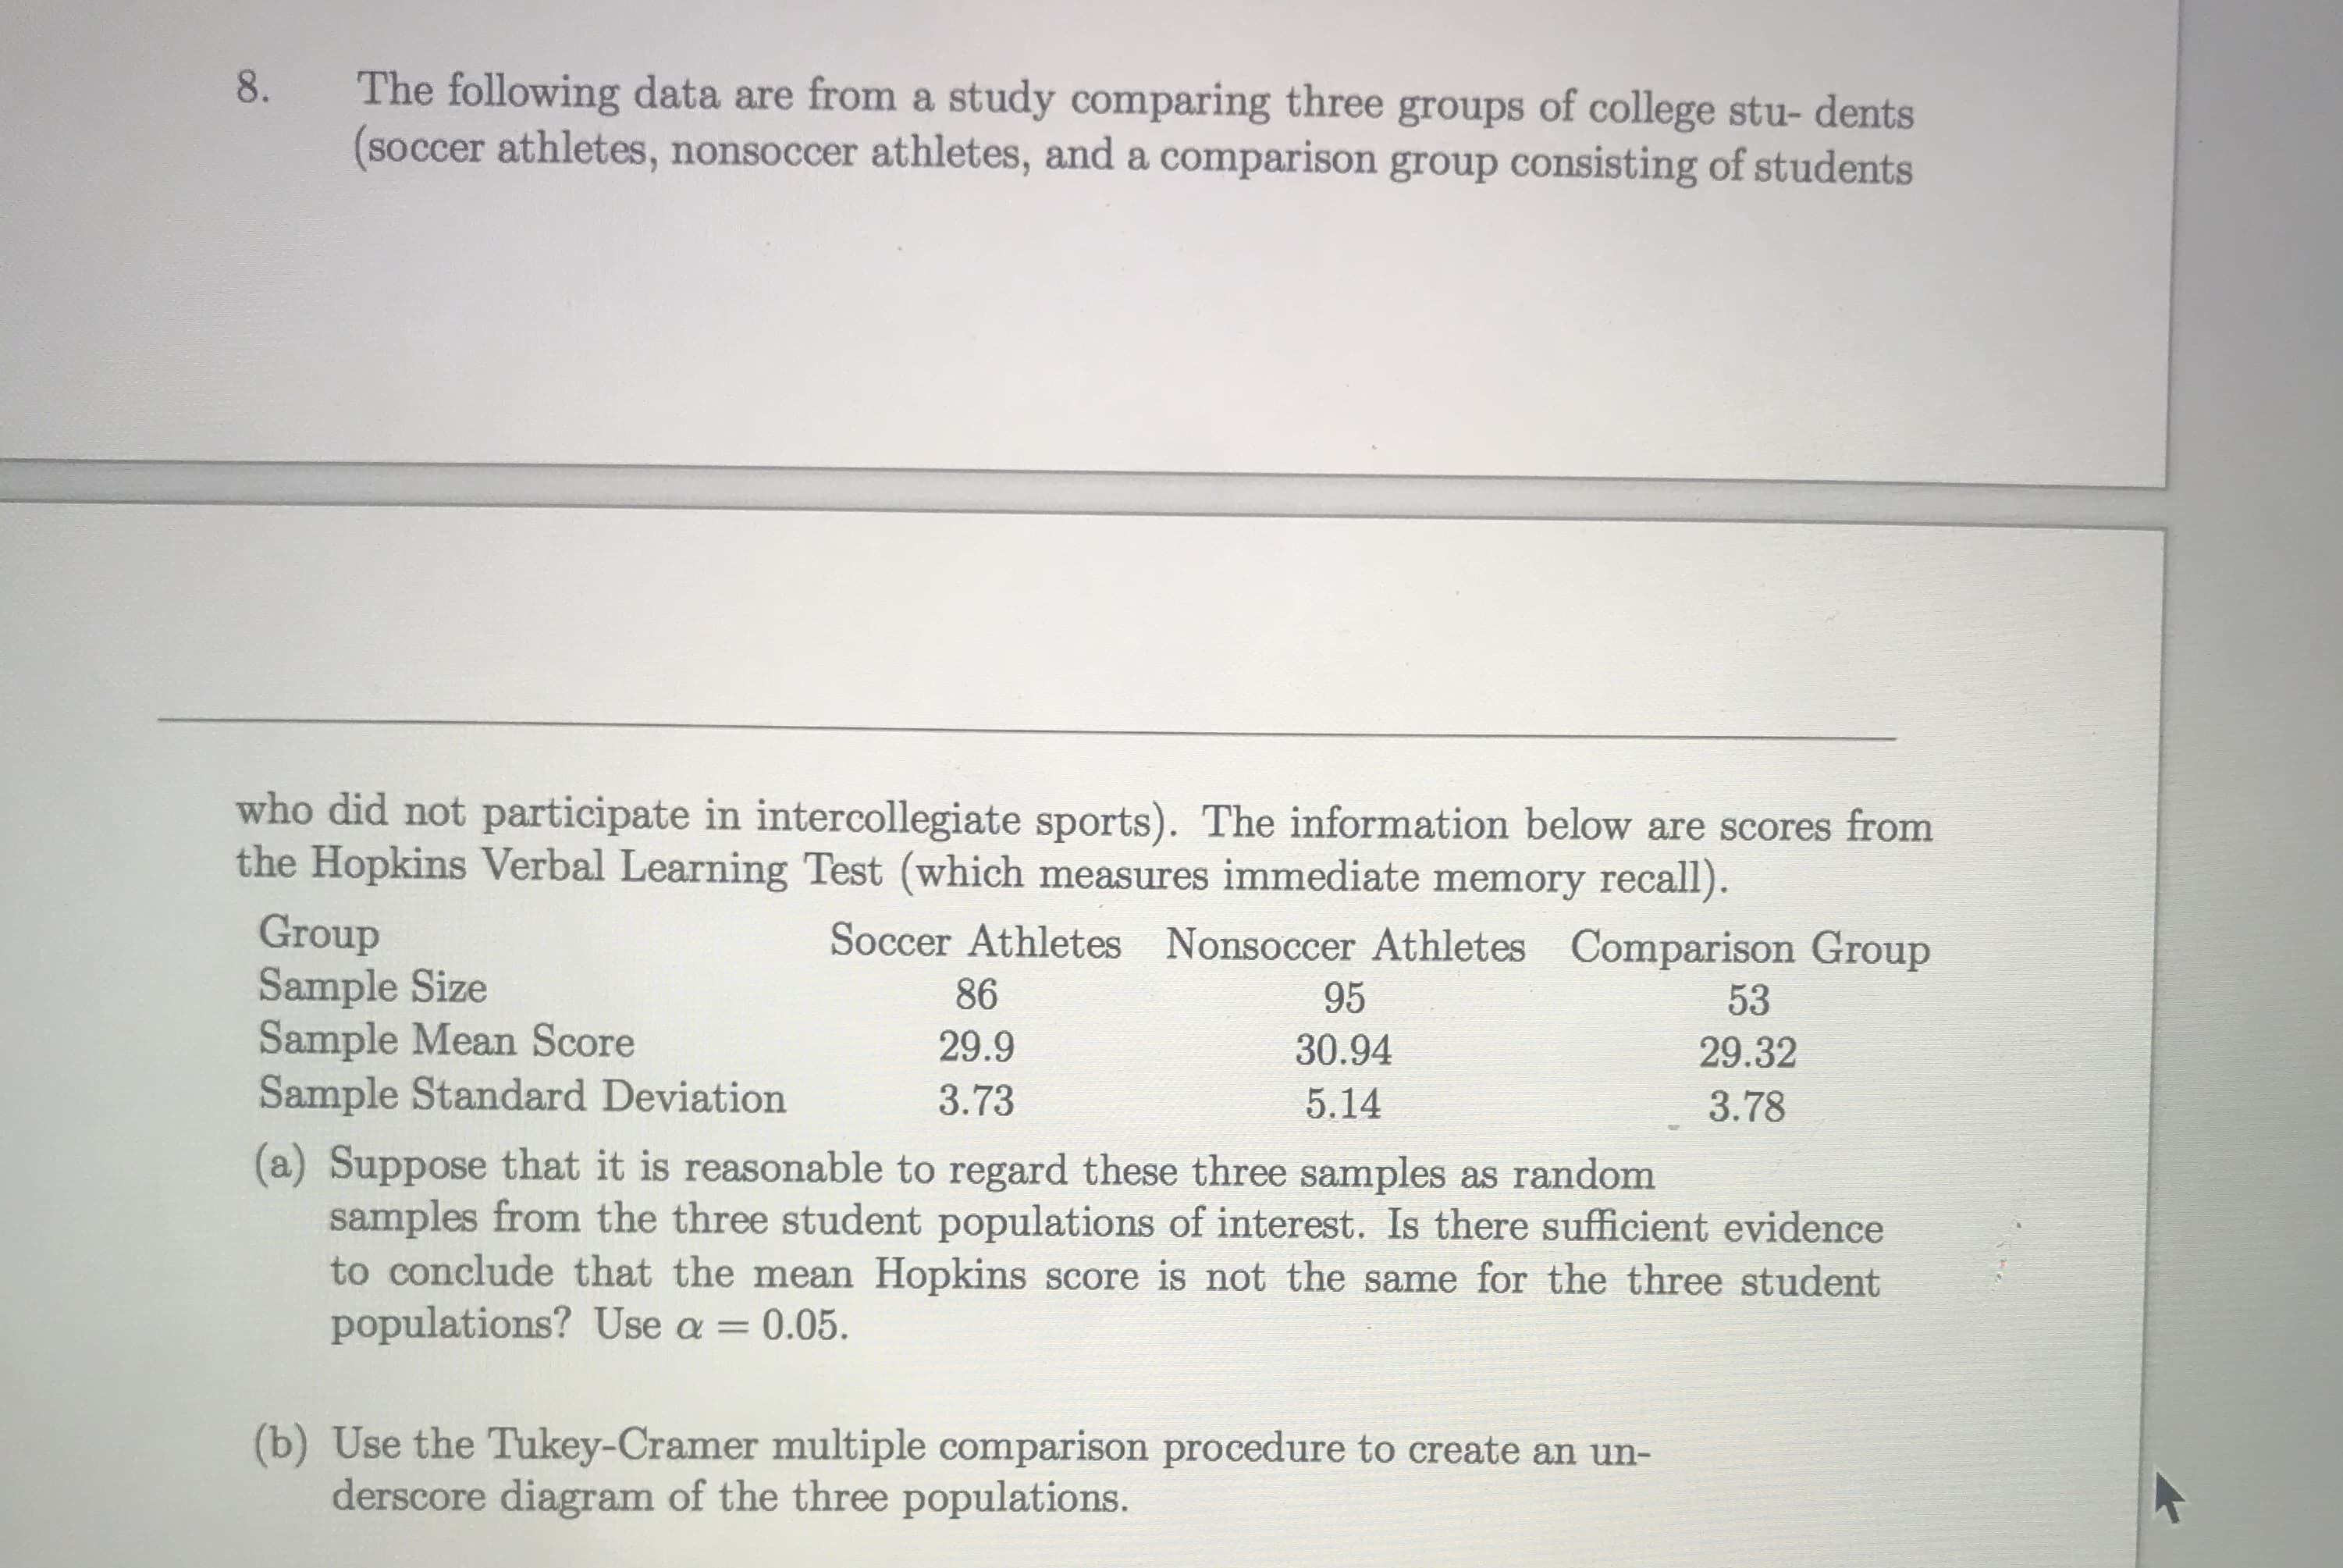 Suppose that it is reasonable to regard these three samples as random
samples from the three student populations of interest. Is there sufficient evidence
to conclude that the mean Hopkins score is not the same for the three student
populations? Use a =
0.05.
